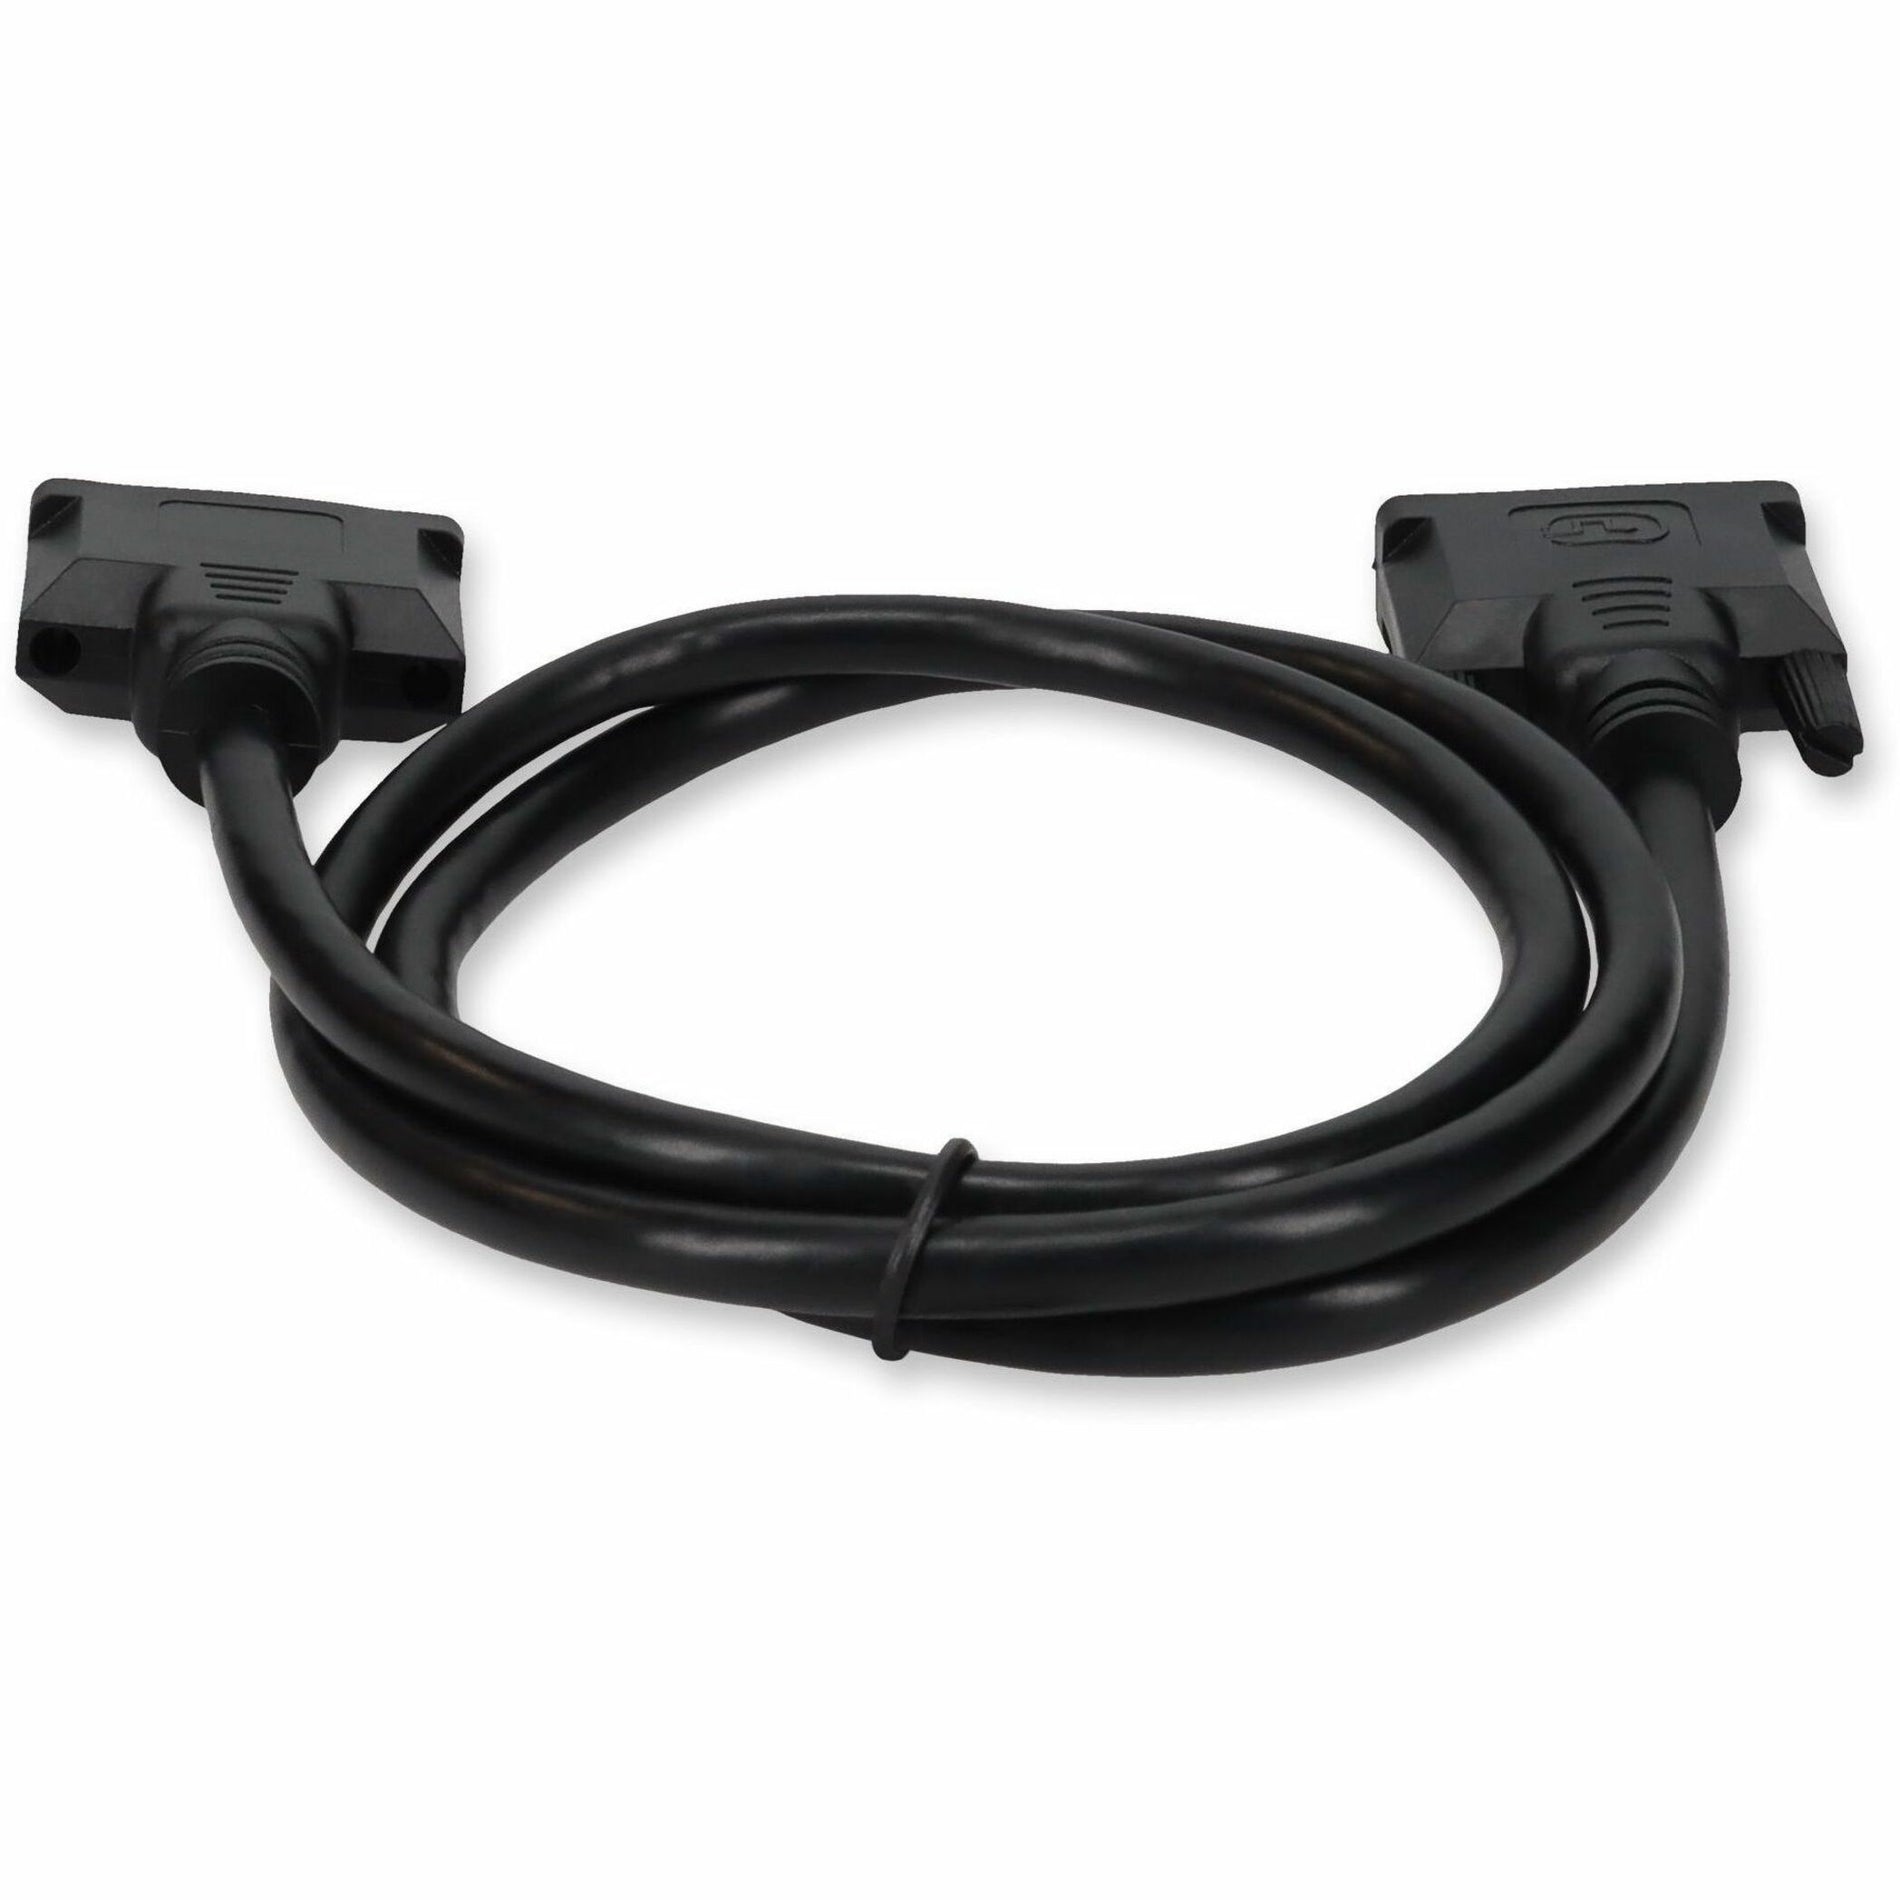 AddOn DVID2DVIDDL1F 1ft (30cm) DVI-D to DVI-D Dual Link Cable - Male to Male, Copper Conductor, 3 Year Limited Warranty